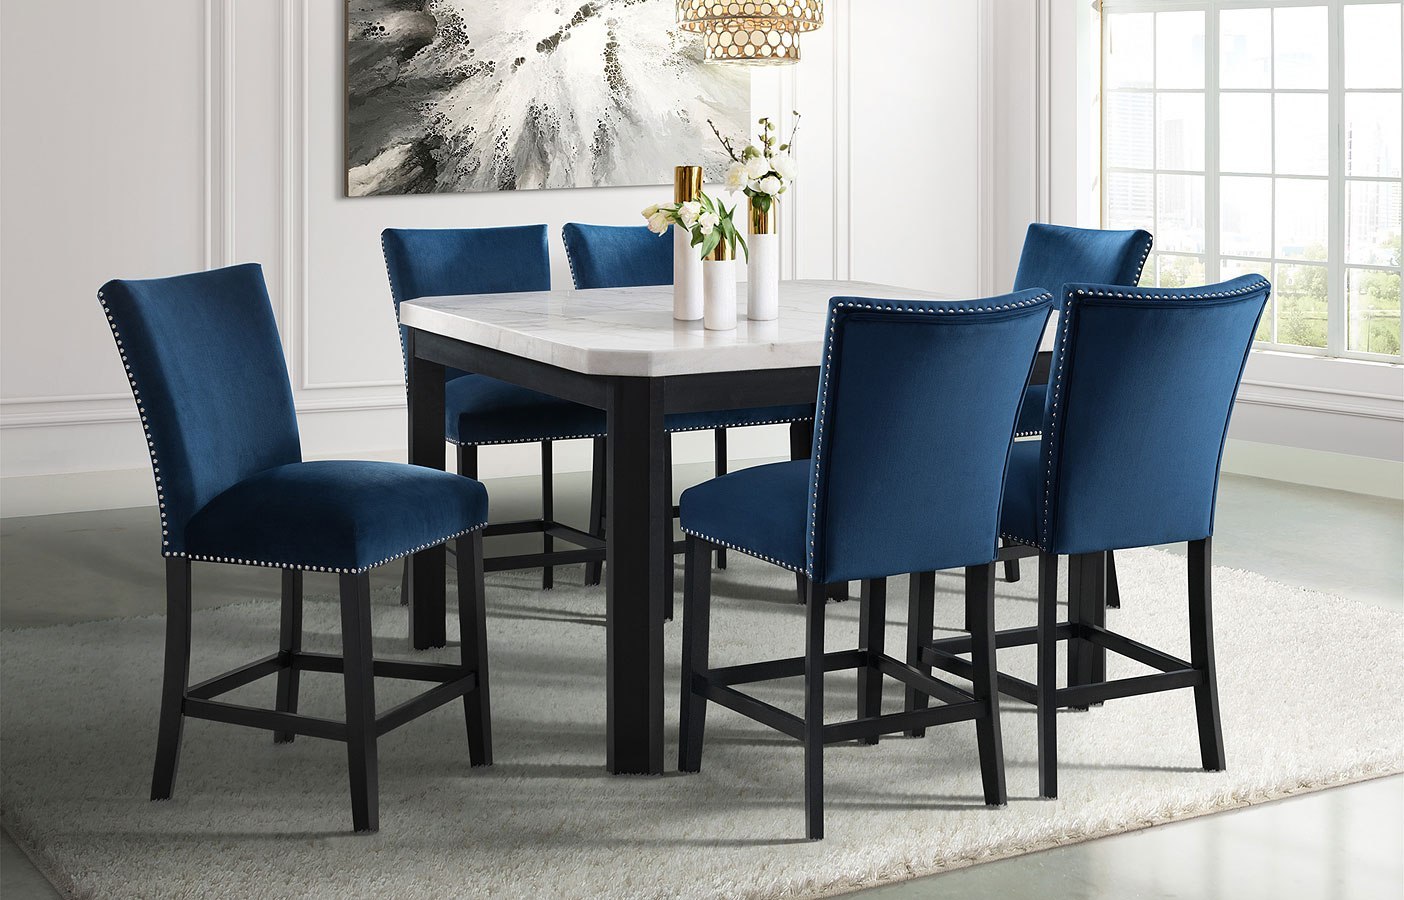 Francesca Counter Height Dining Room Set W Blue Chairs By Elements Furniture Furniturepick